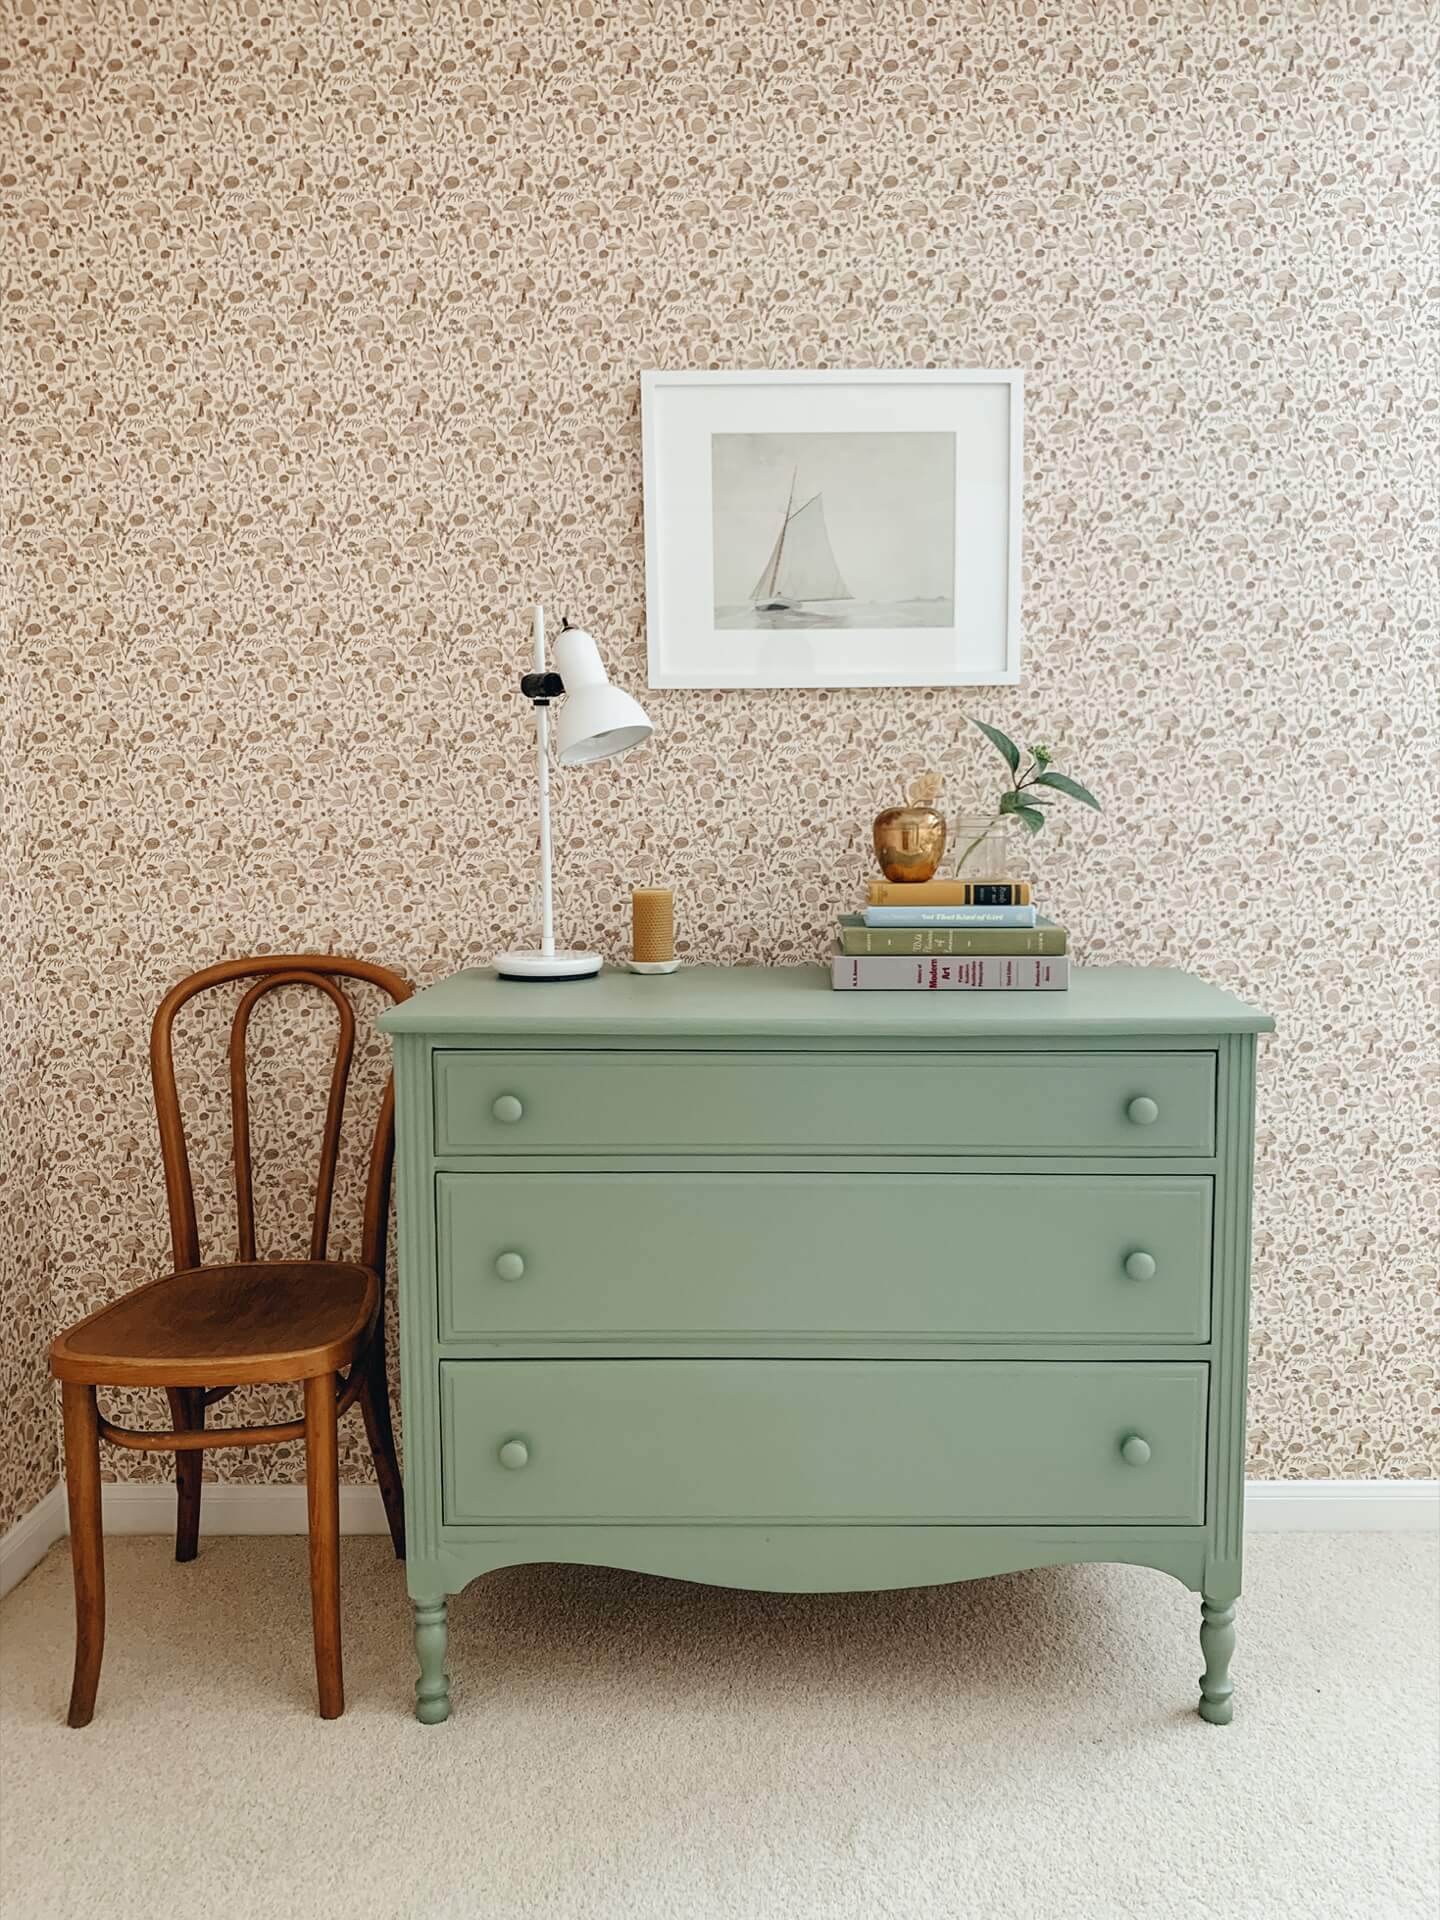 Home tour with Leah Gaeddert - green painted vintage drawers against a background of ditsy floral wallpaper